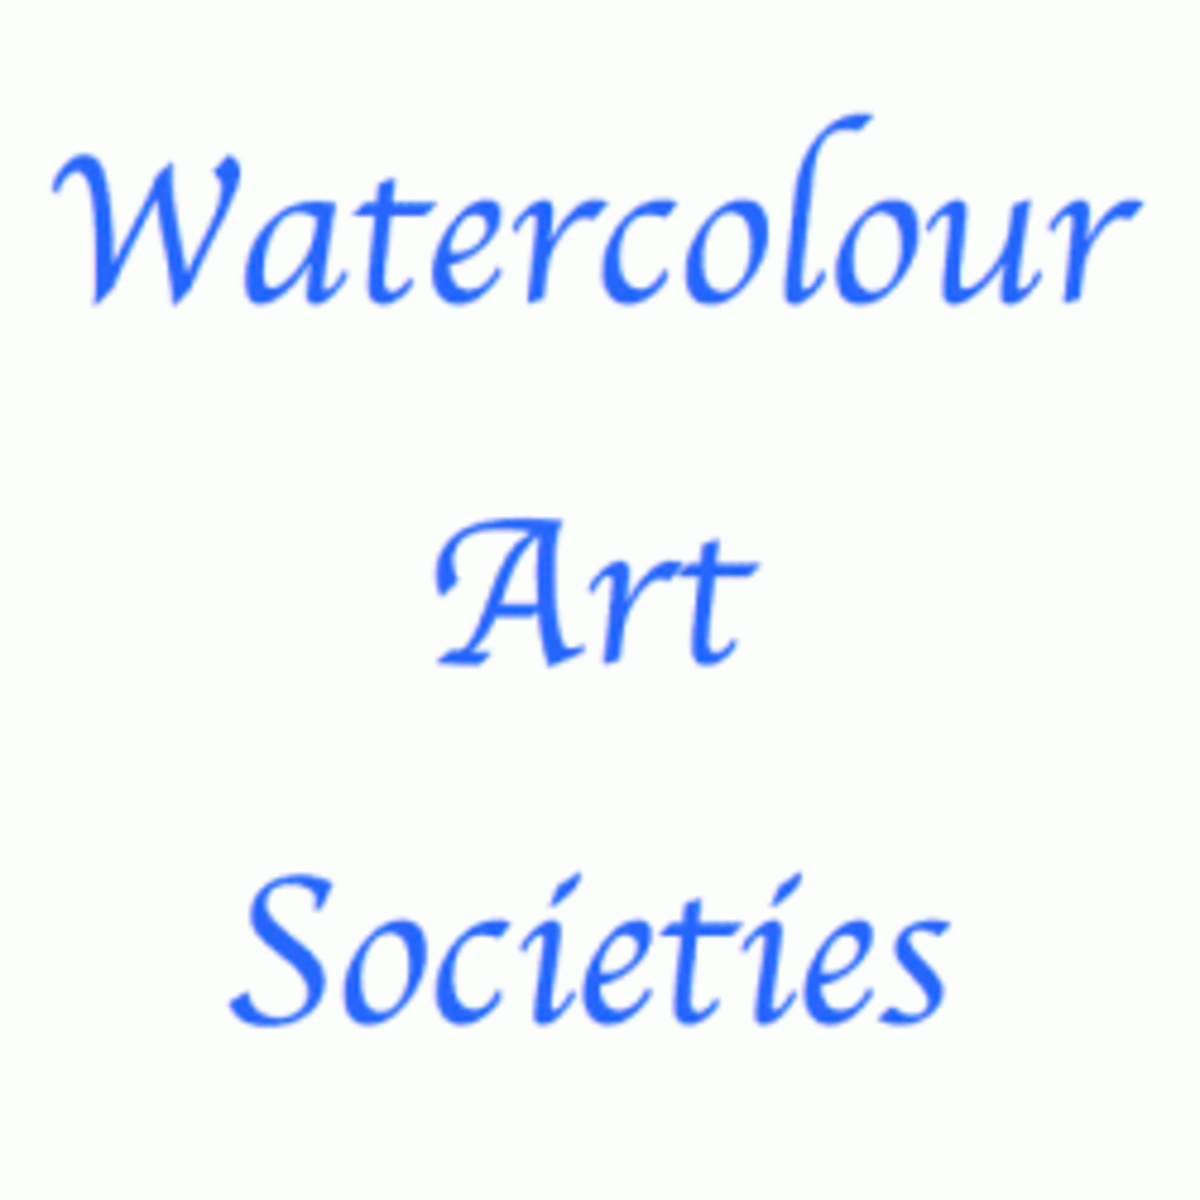 Watercolour Societies - Resources for Artists